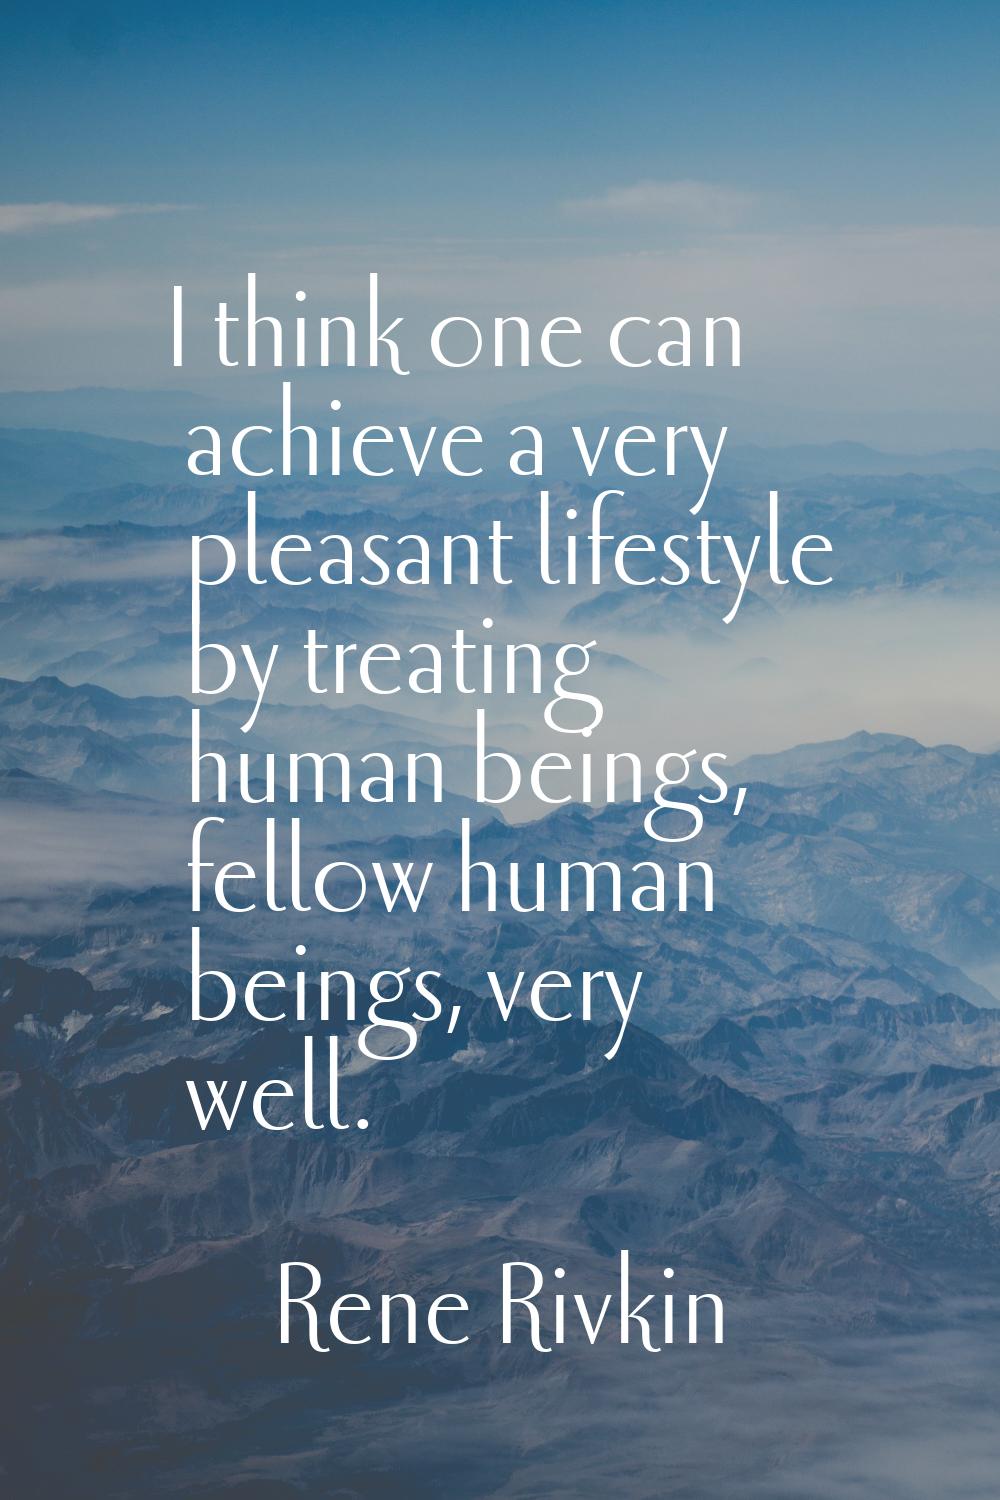 I think one can achieve a very pleasant lifestyle by treating human beings, fellow human beings, ve